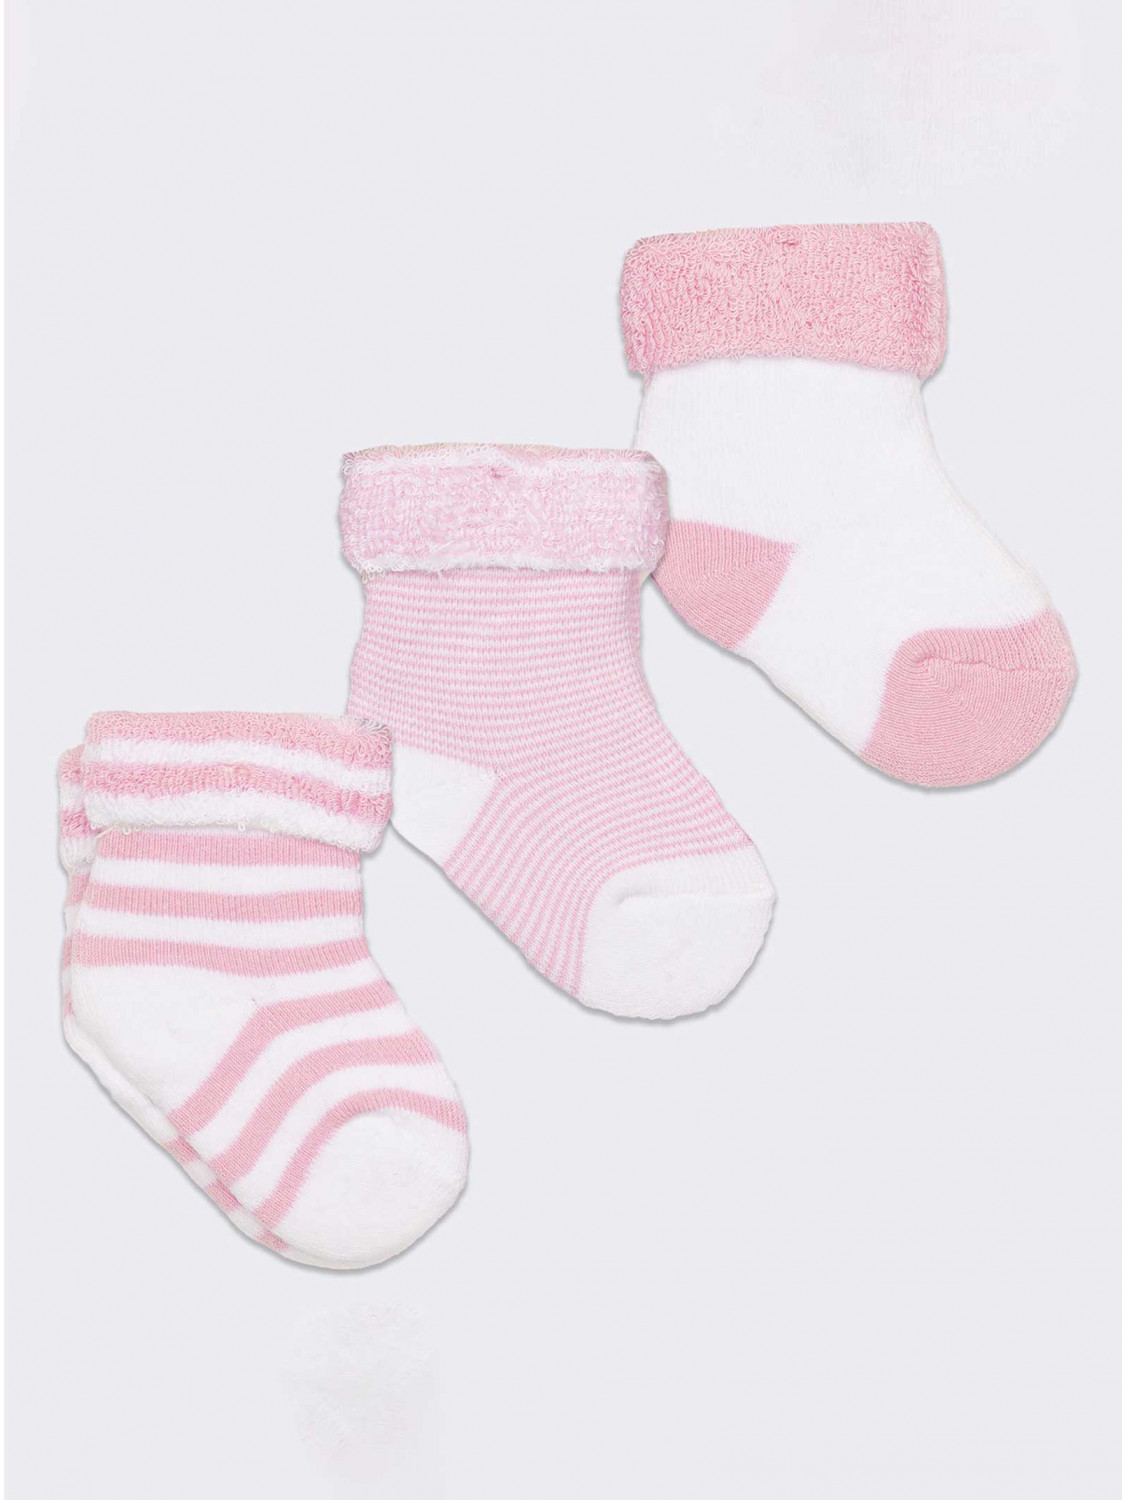 3 pairs of patterned newborn socks in soft warm cotton